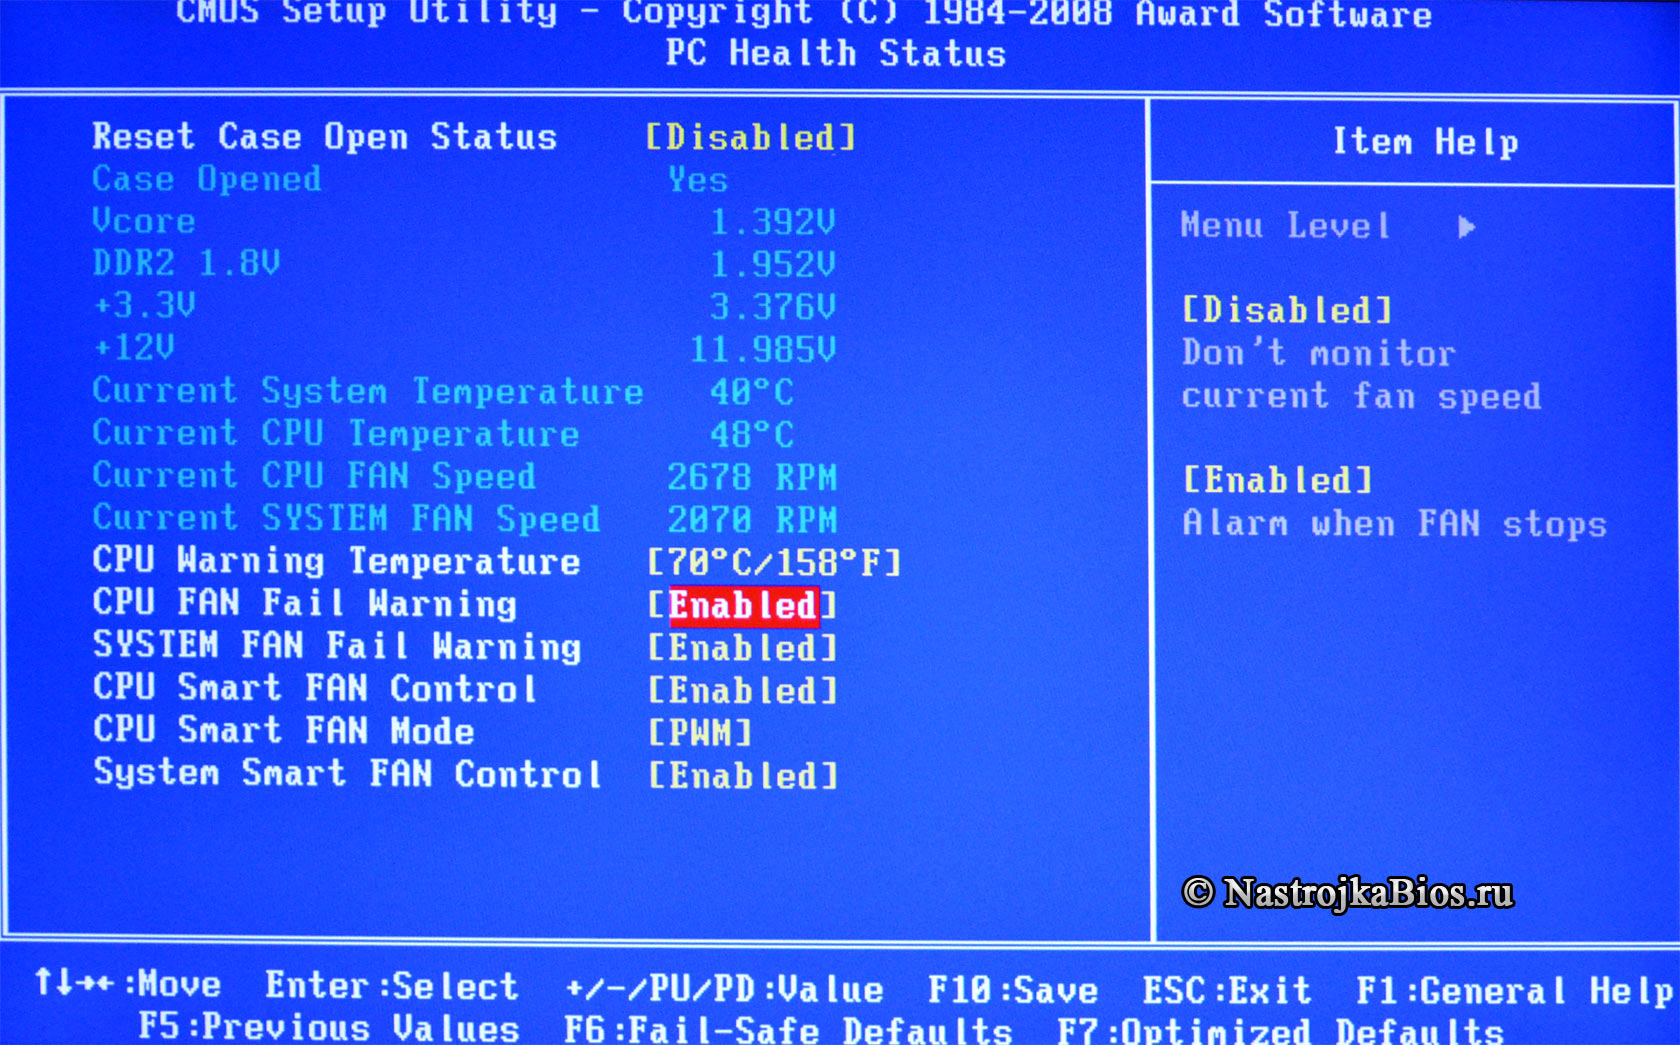 Computer System Fan Failure : How to fix System Fan (90B) error on a HP